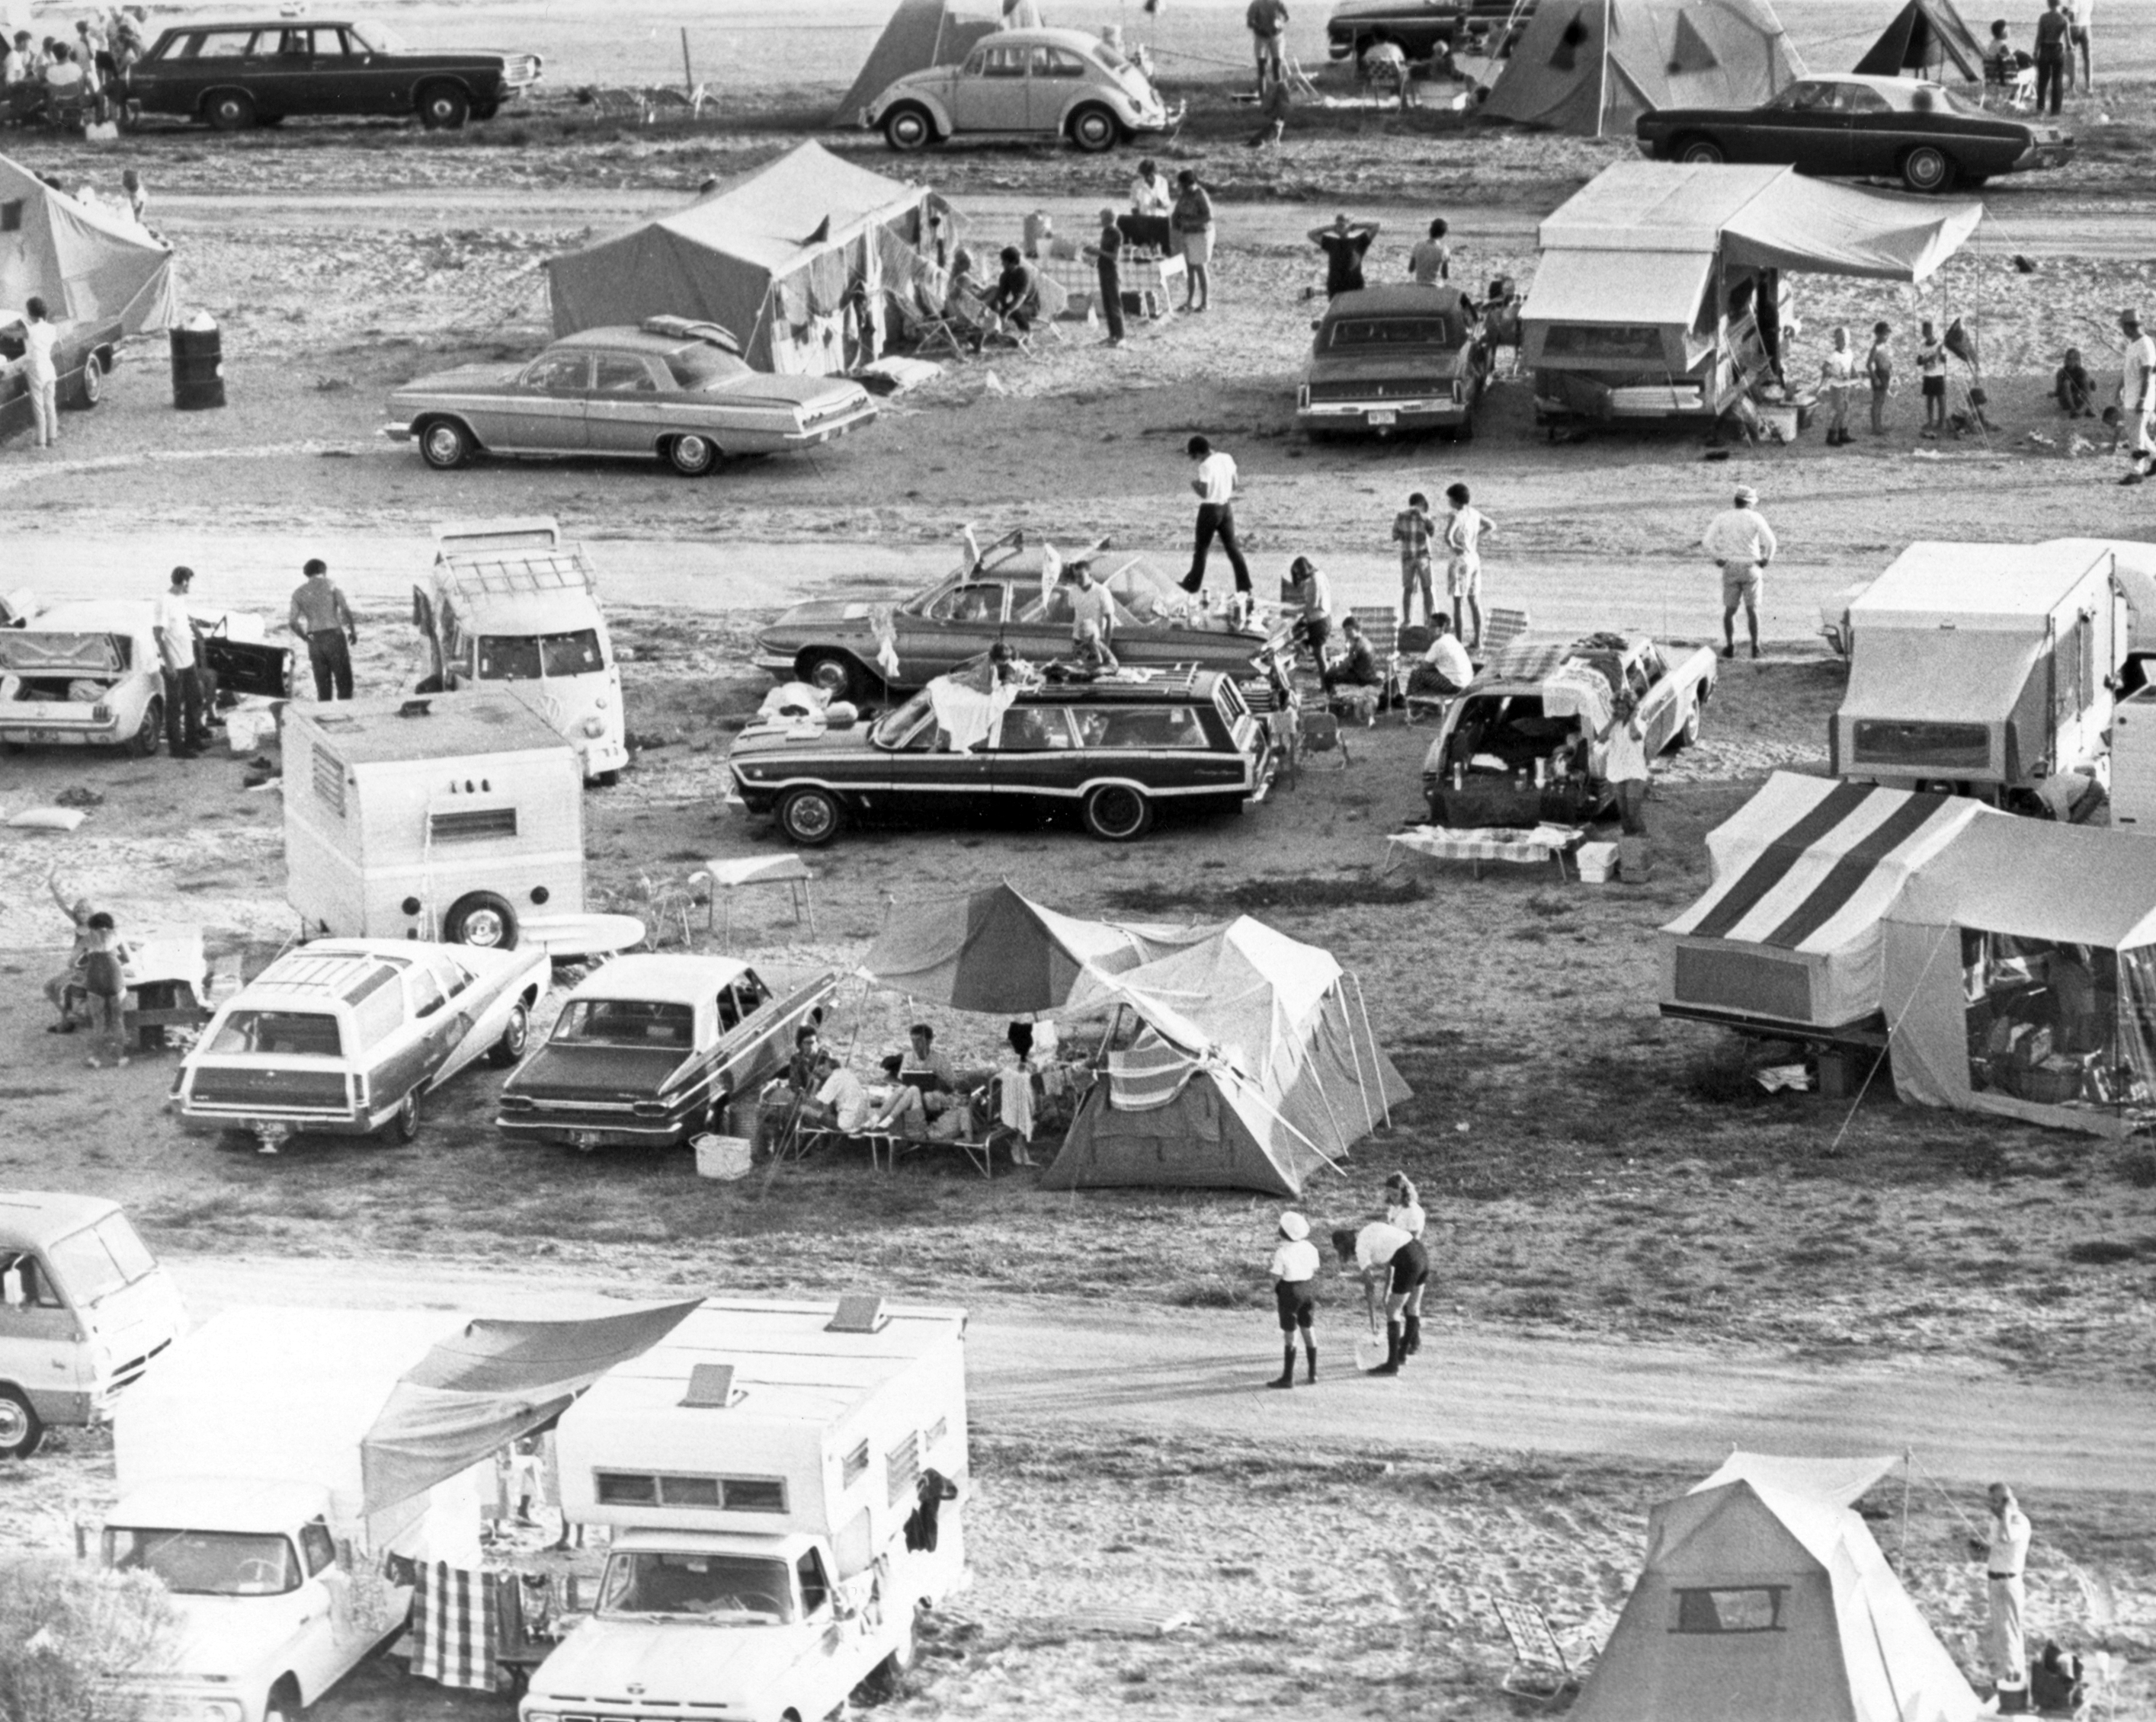 A camping area of visitors arriving in masses to see the historic Apollo 11 launch  on July 16, 1969.